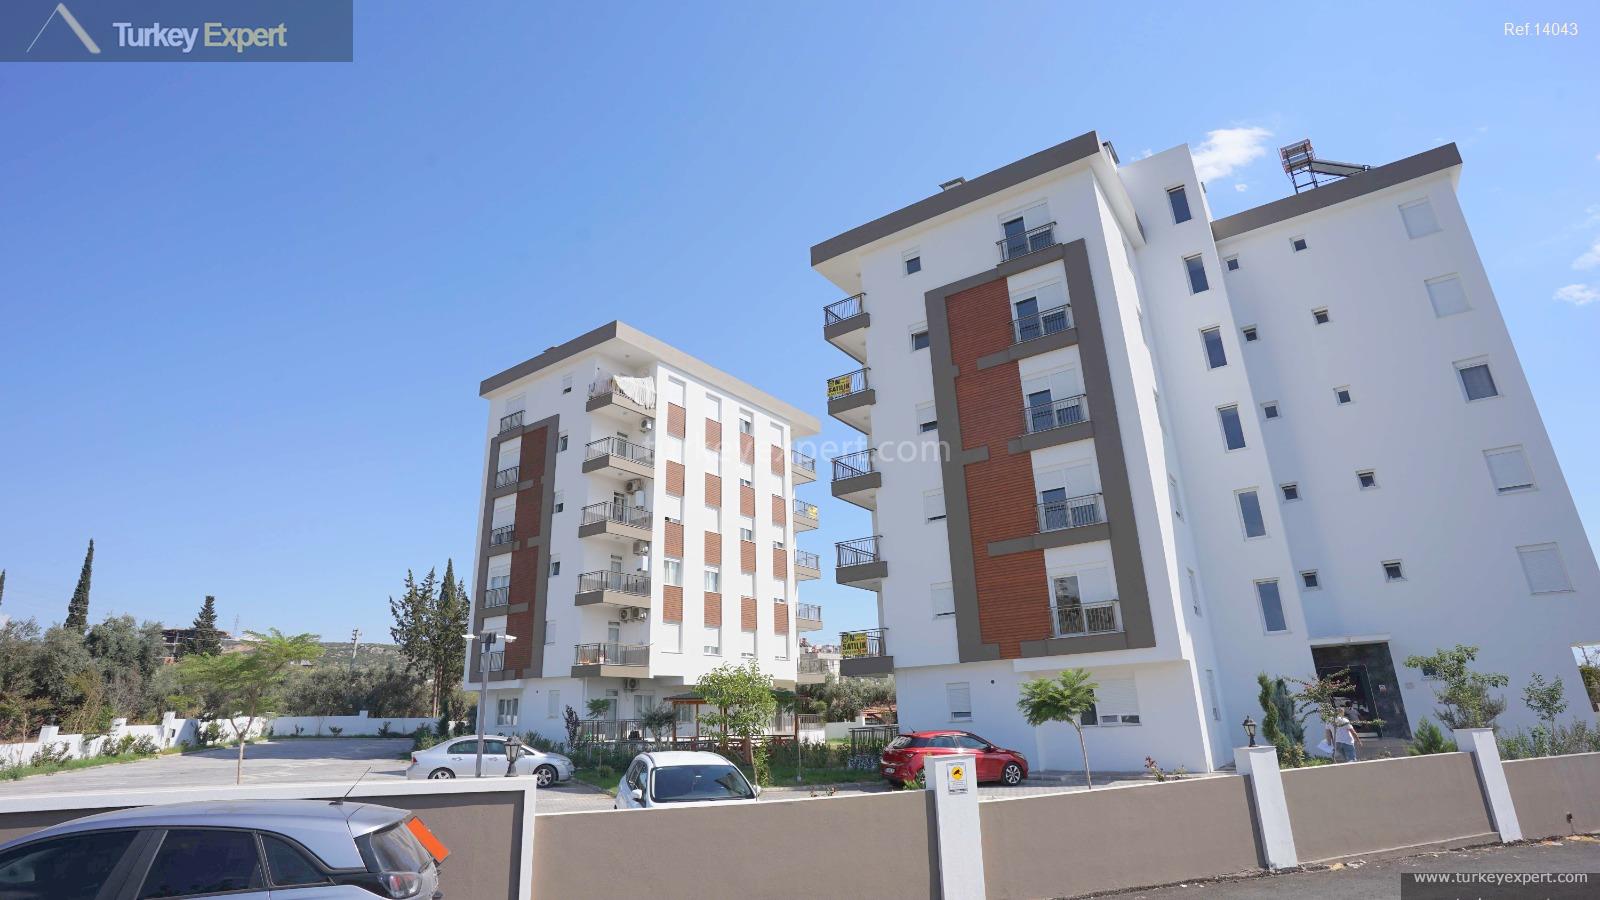 105bedroom apartments for sale with an attractive price in antalya27